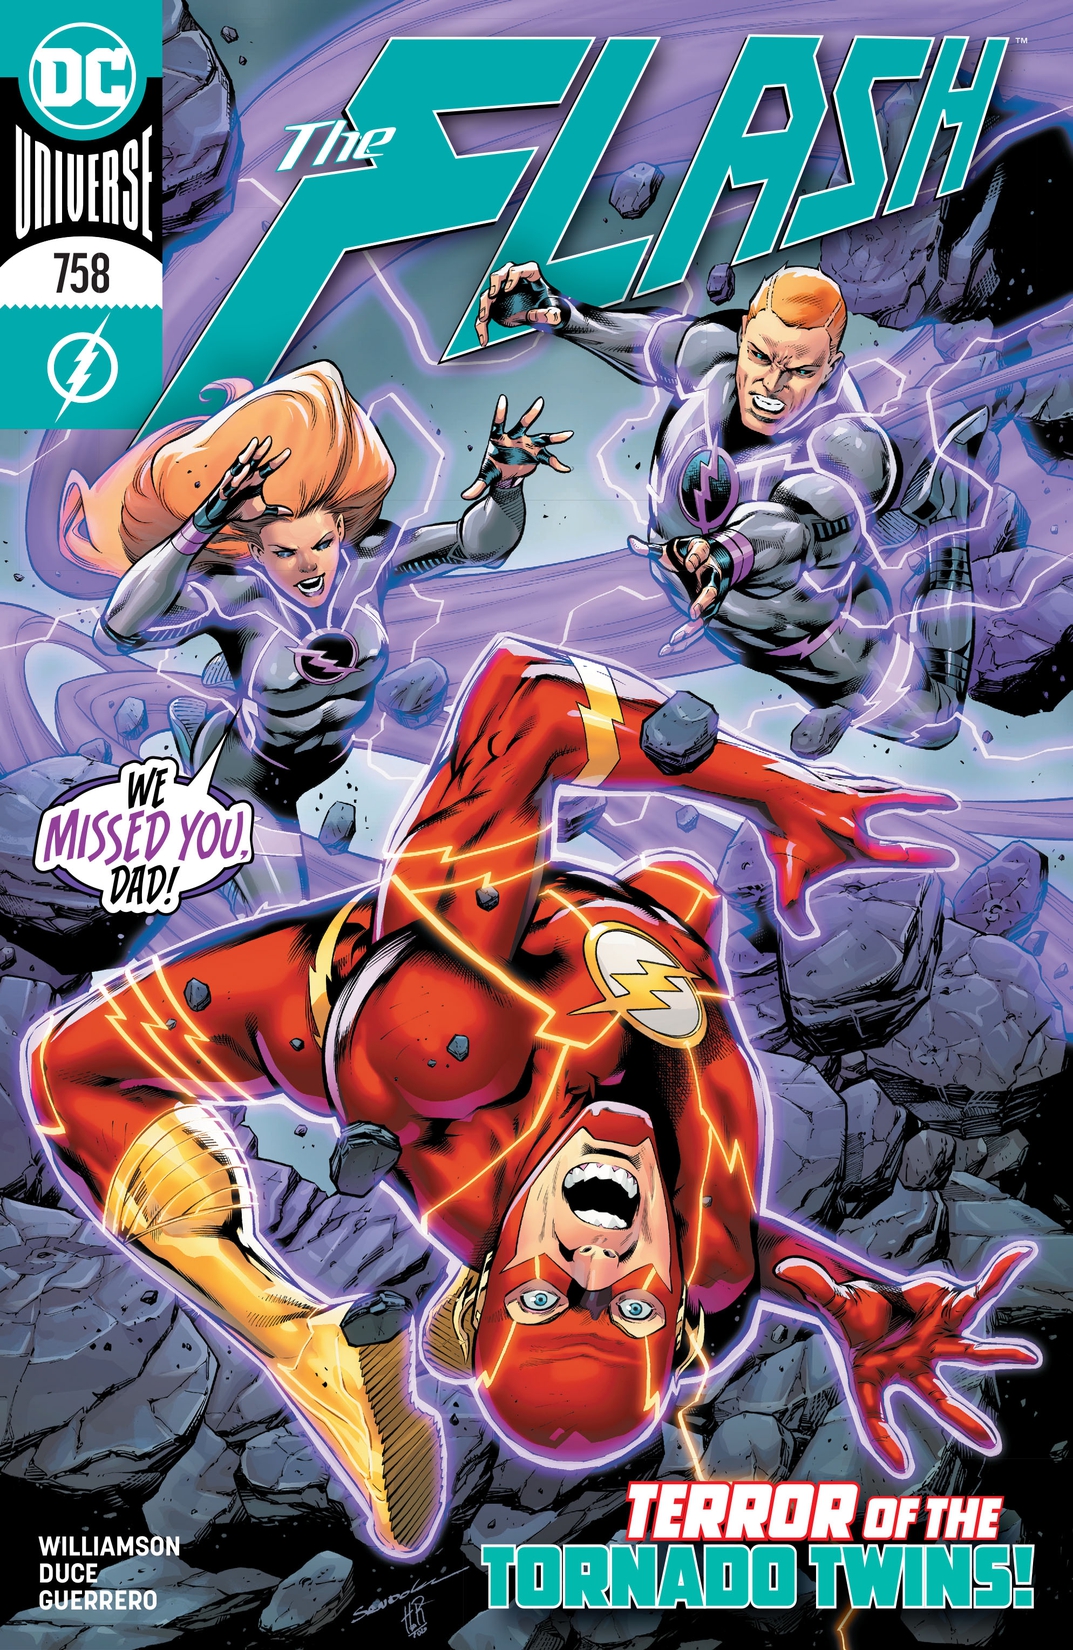 The Flash (2016-) #758 preview images